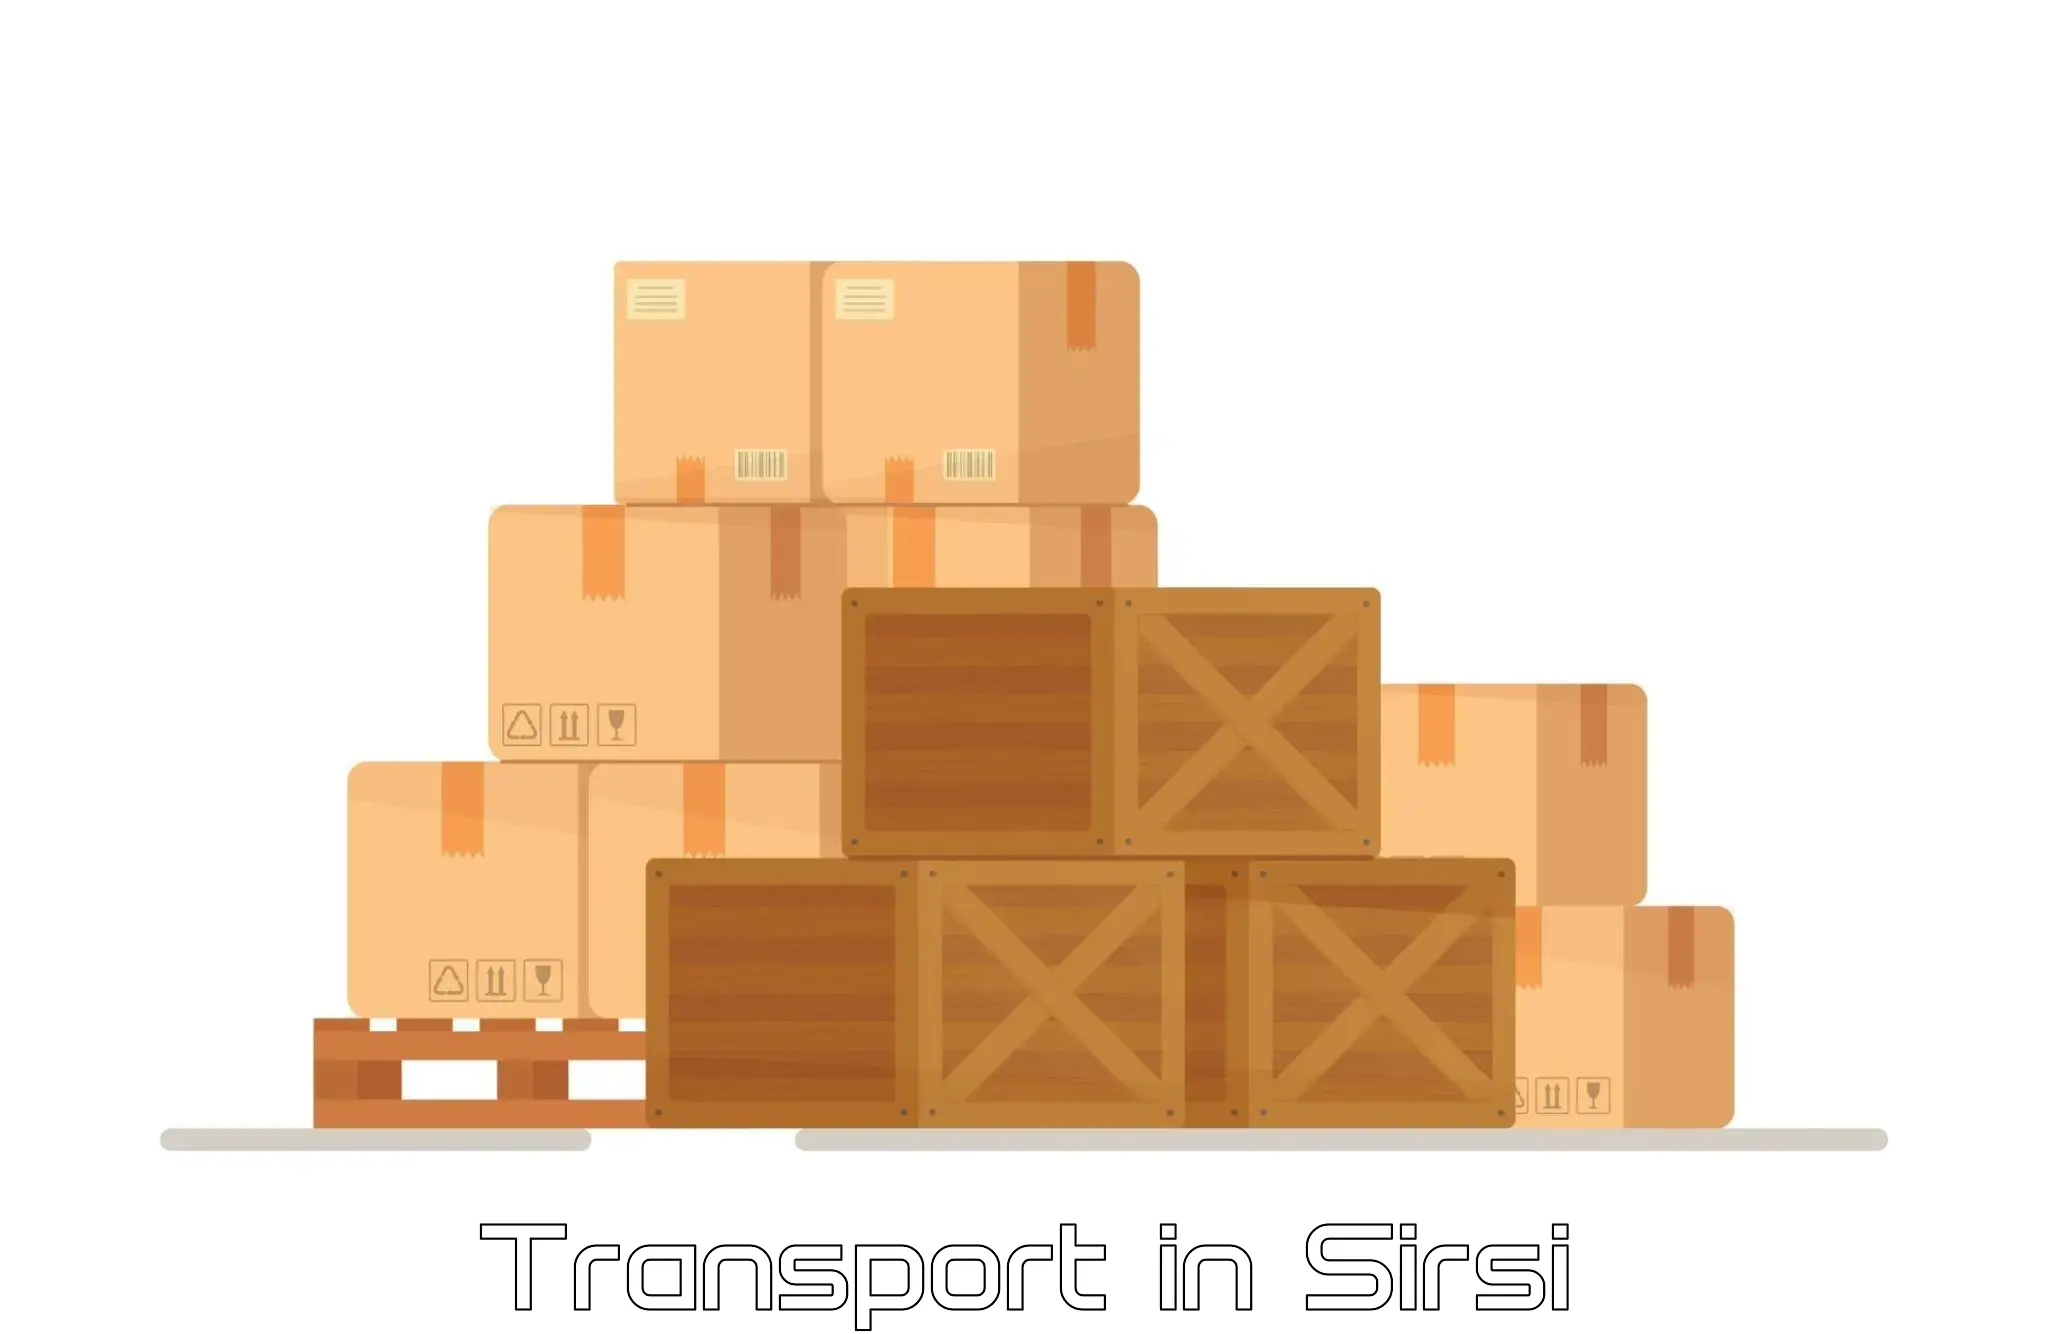 Transportation solution services in Sirsi